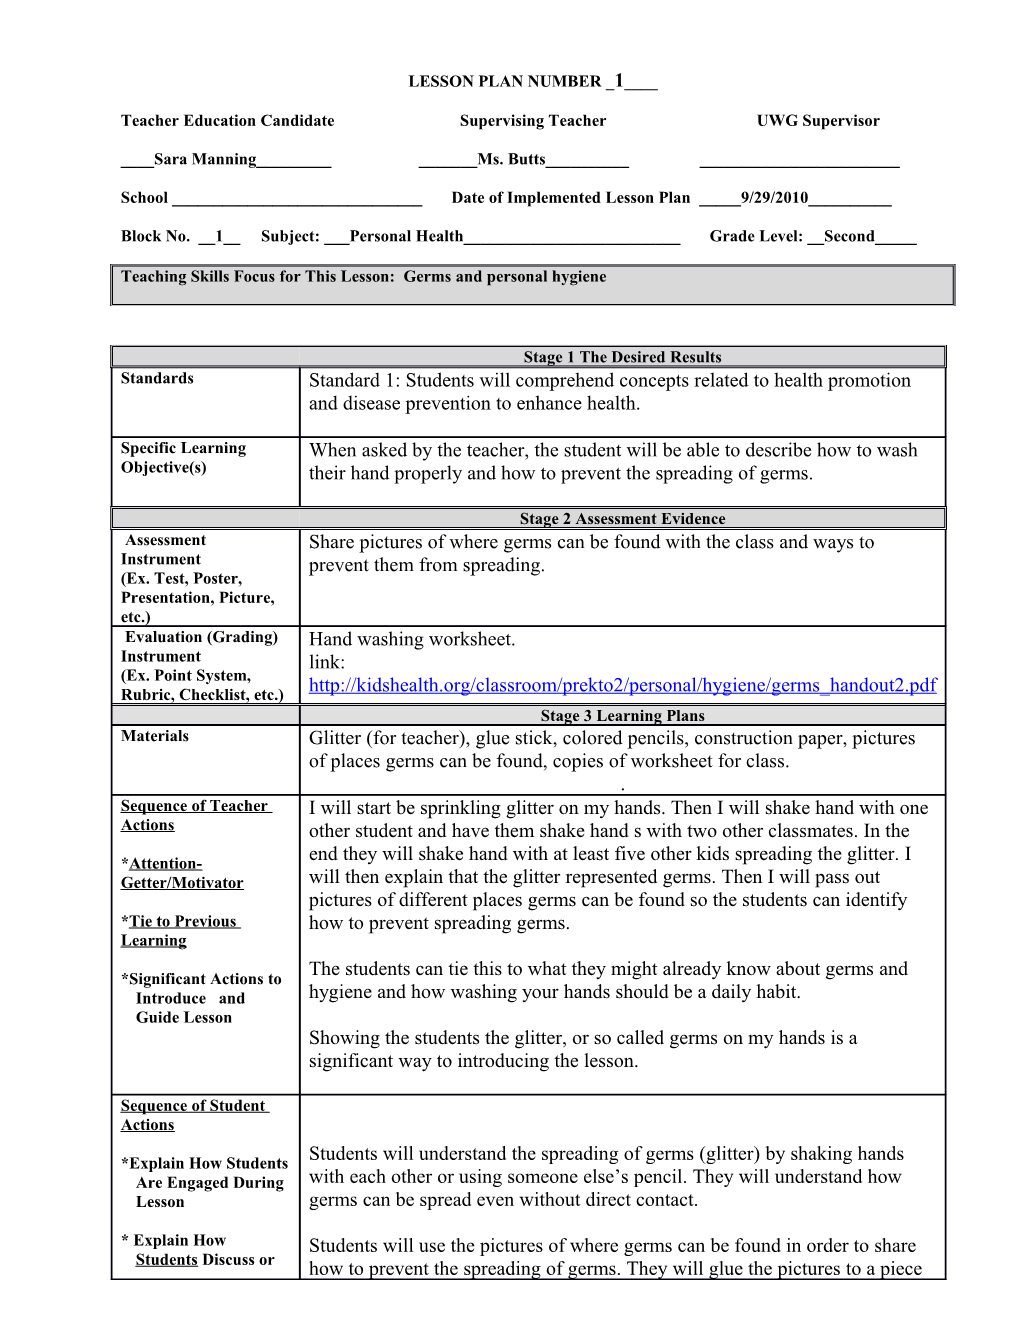 Lesson Planning Template s10